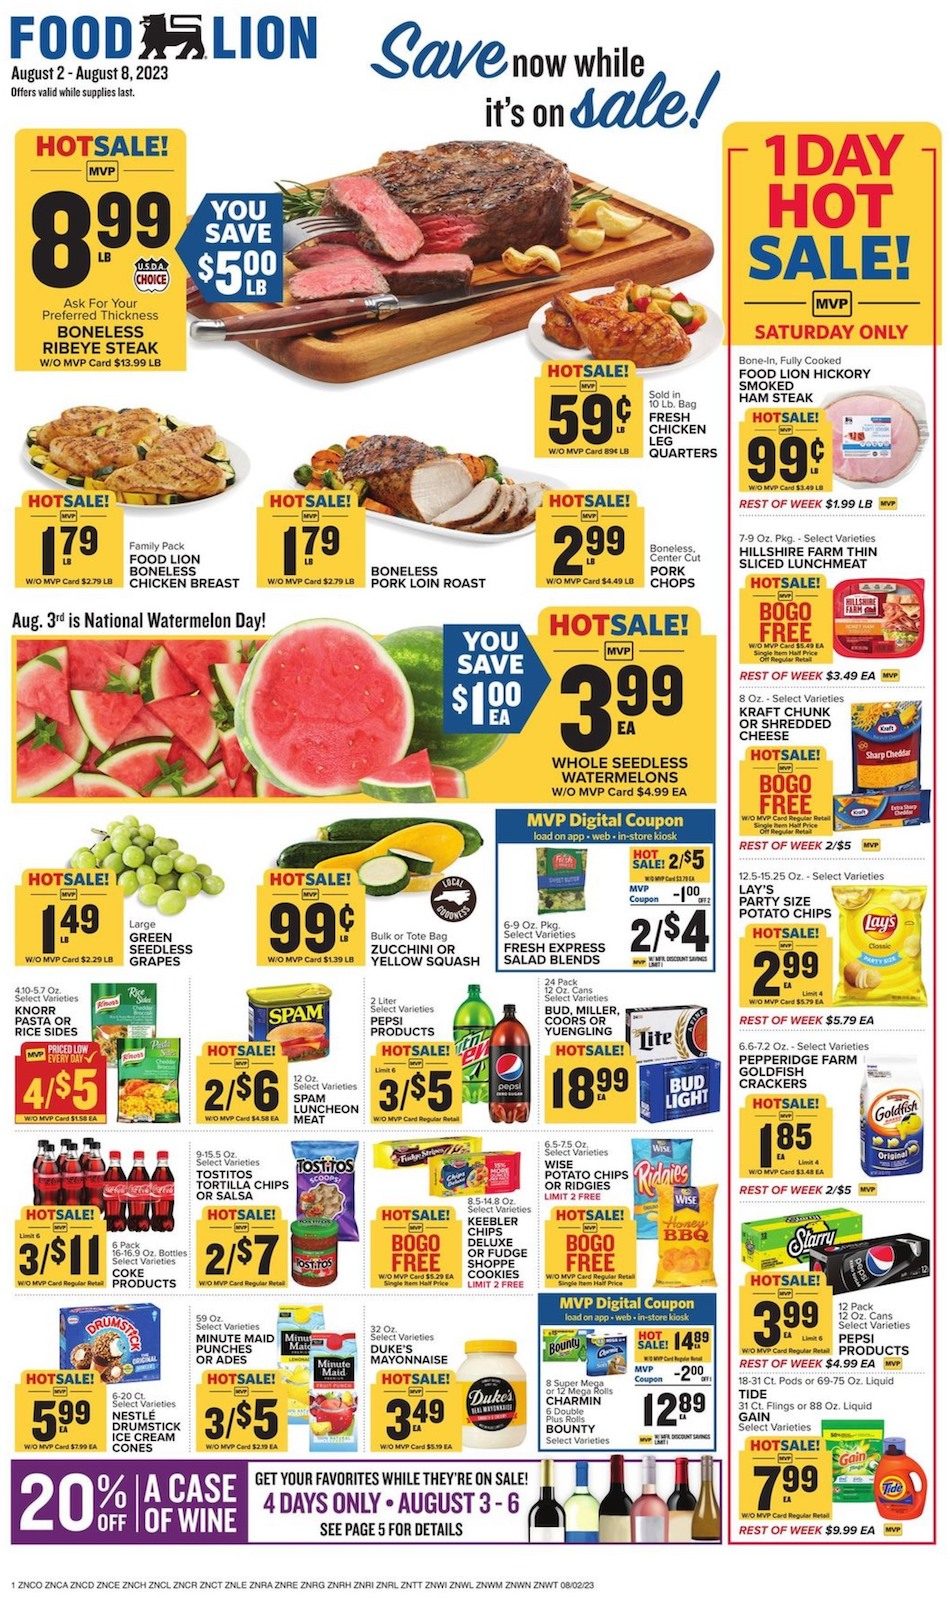 Food Lion Weekly Ad 2nd – 8th August 2023 Page 1